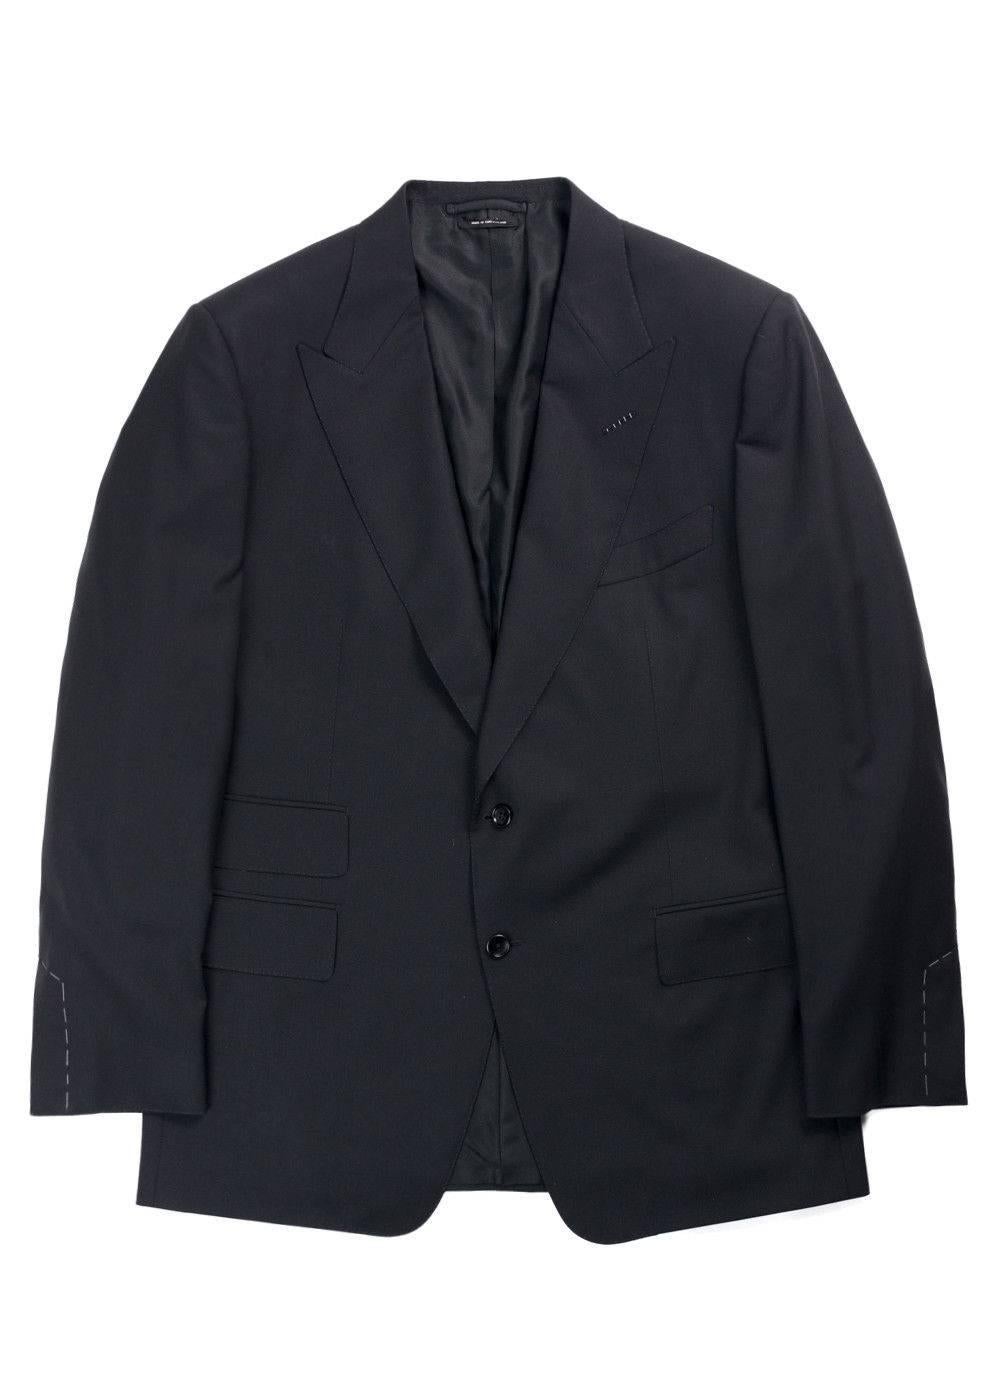 Brand New Tom Ford Windsor 3 Piece Suit
Original Tags & Hanger Included
Retails in Stores & Online for $3960
Size EUR 58R / US 48 Fits True to Size

Lend a hint of effortless sophistication to your formal repertoire courtesy of Tom Ford's